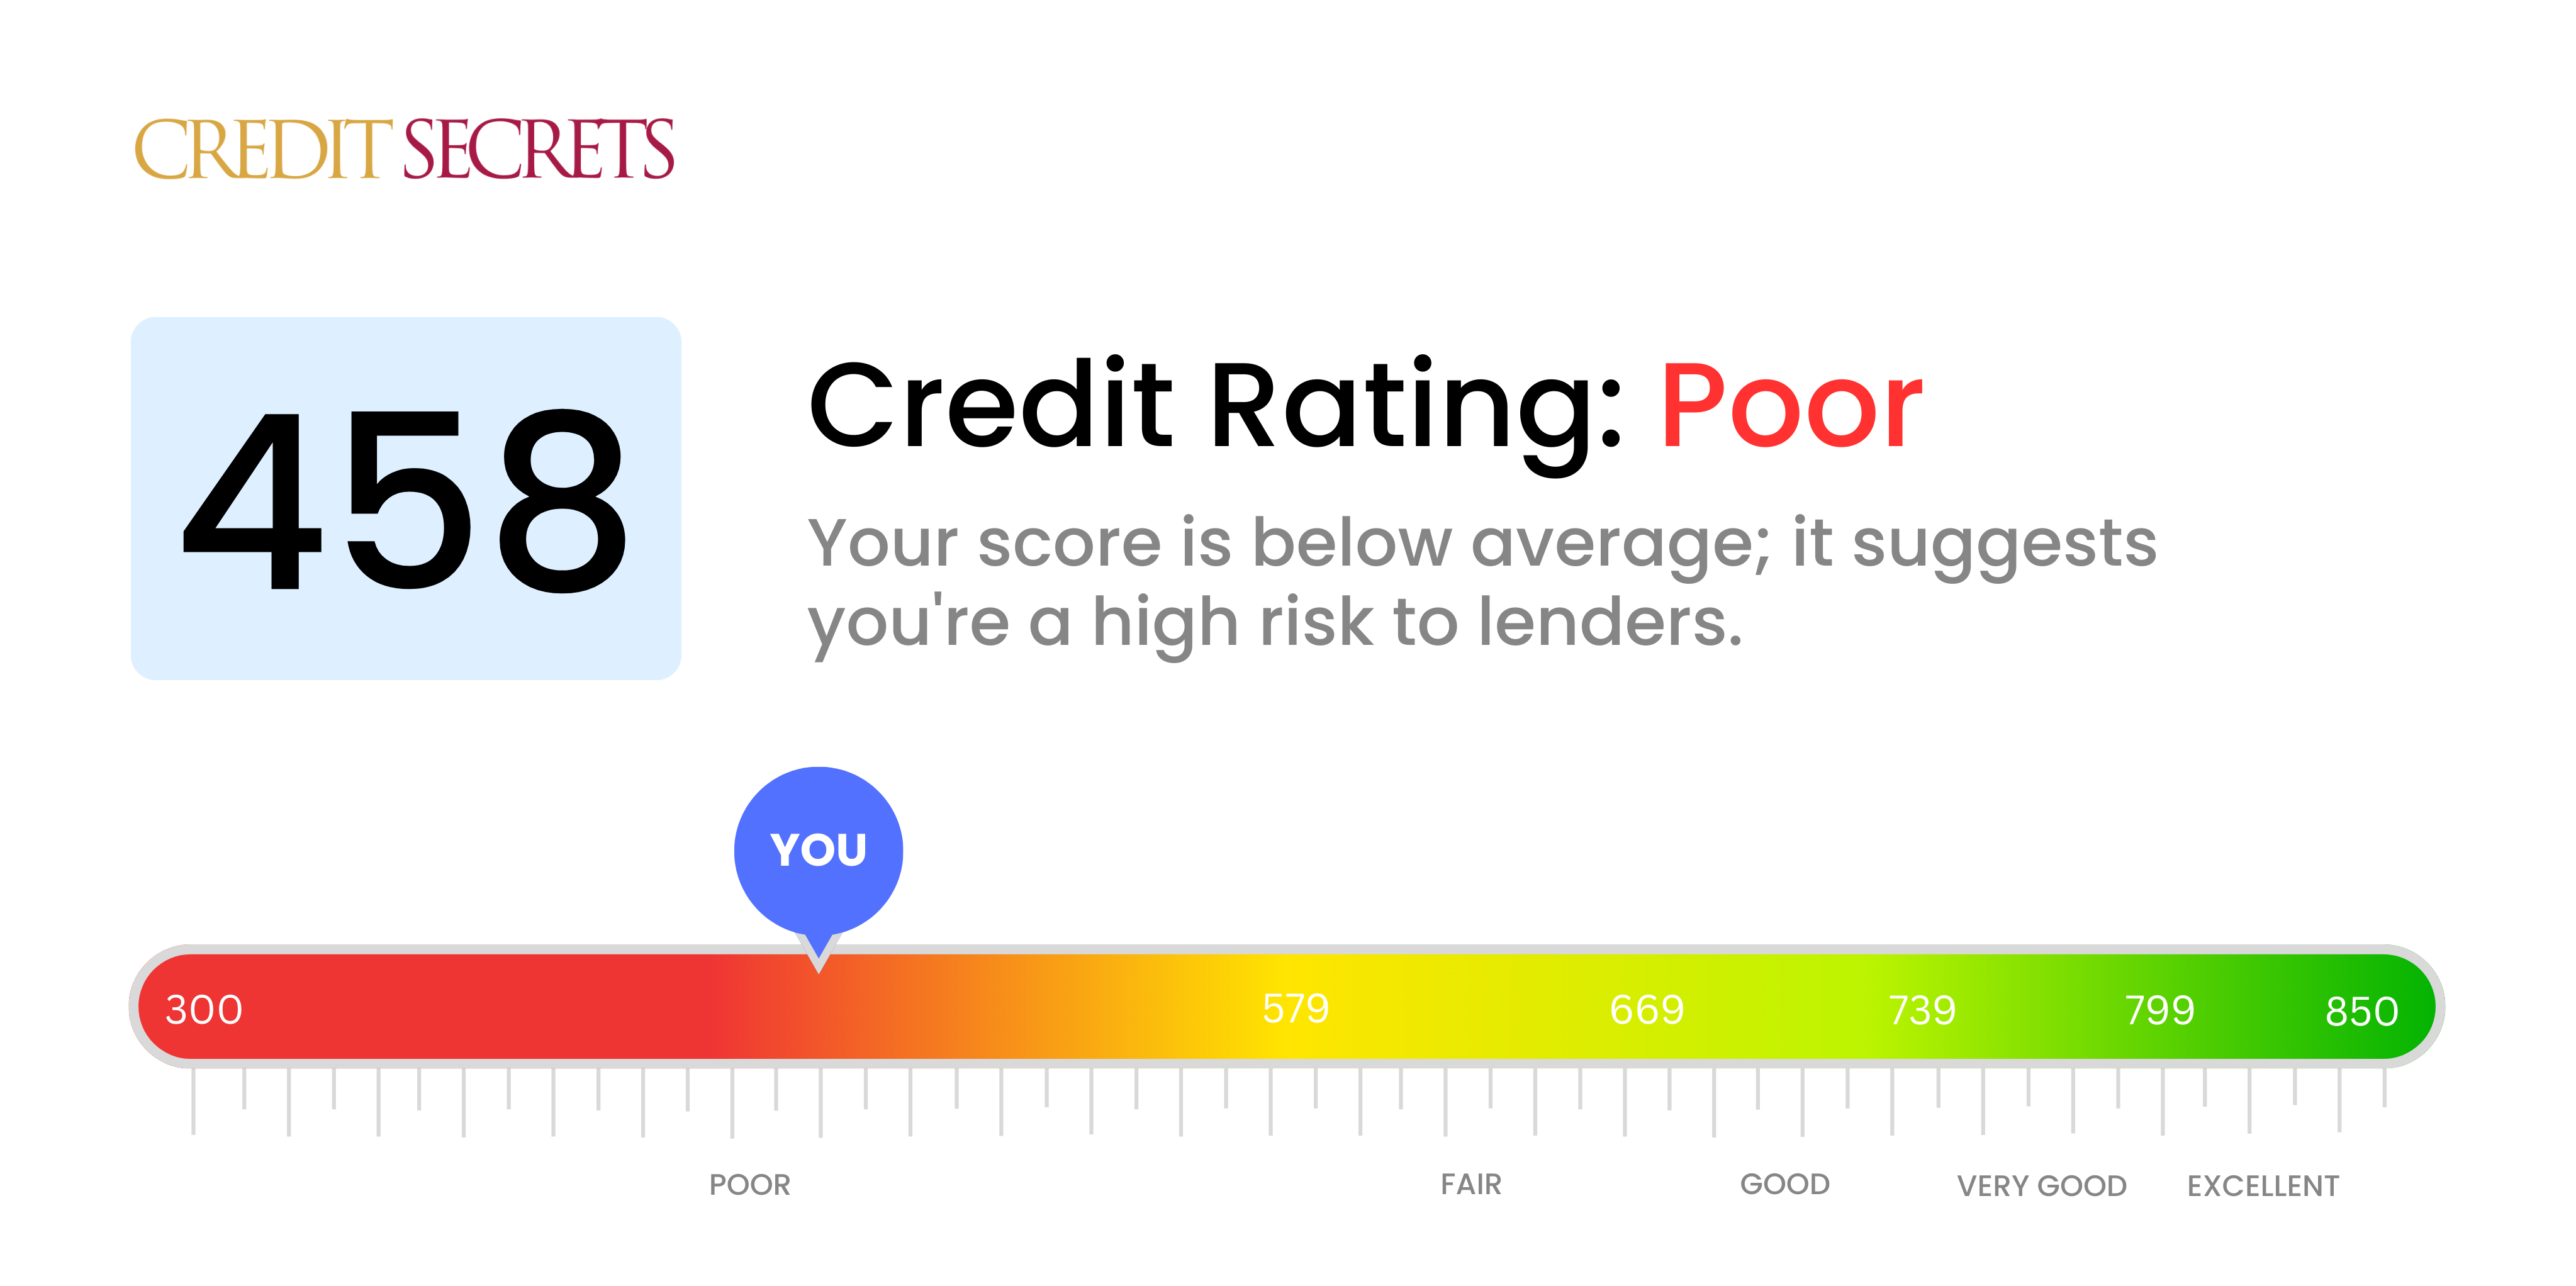 Is 458 a good credit score?